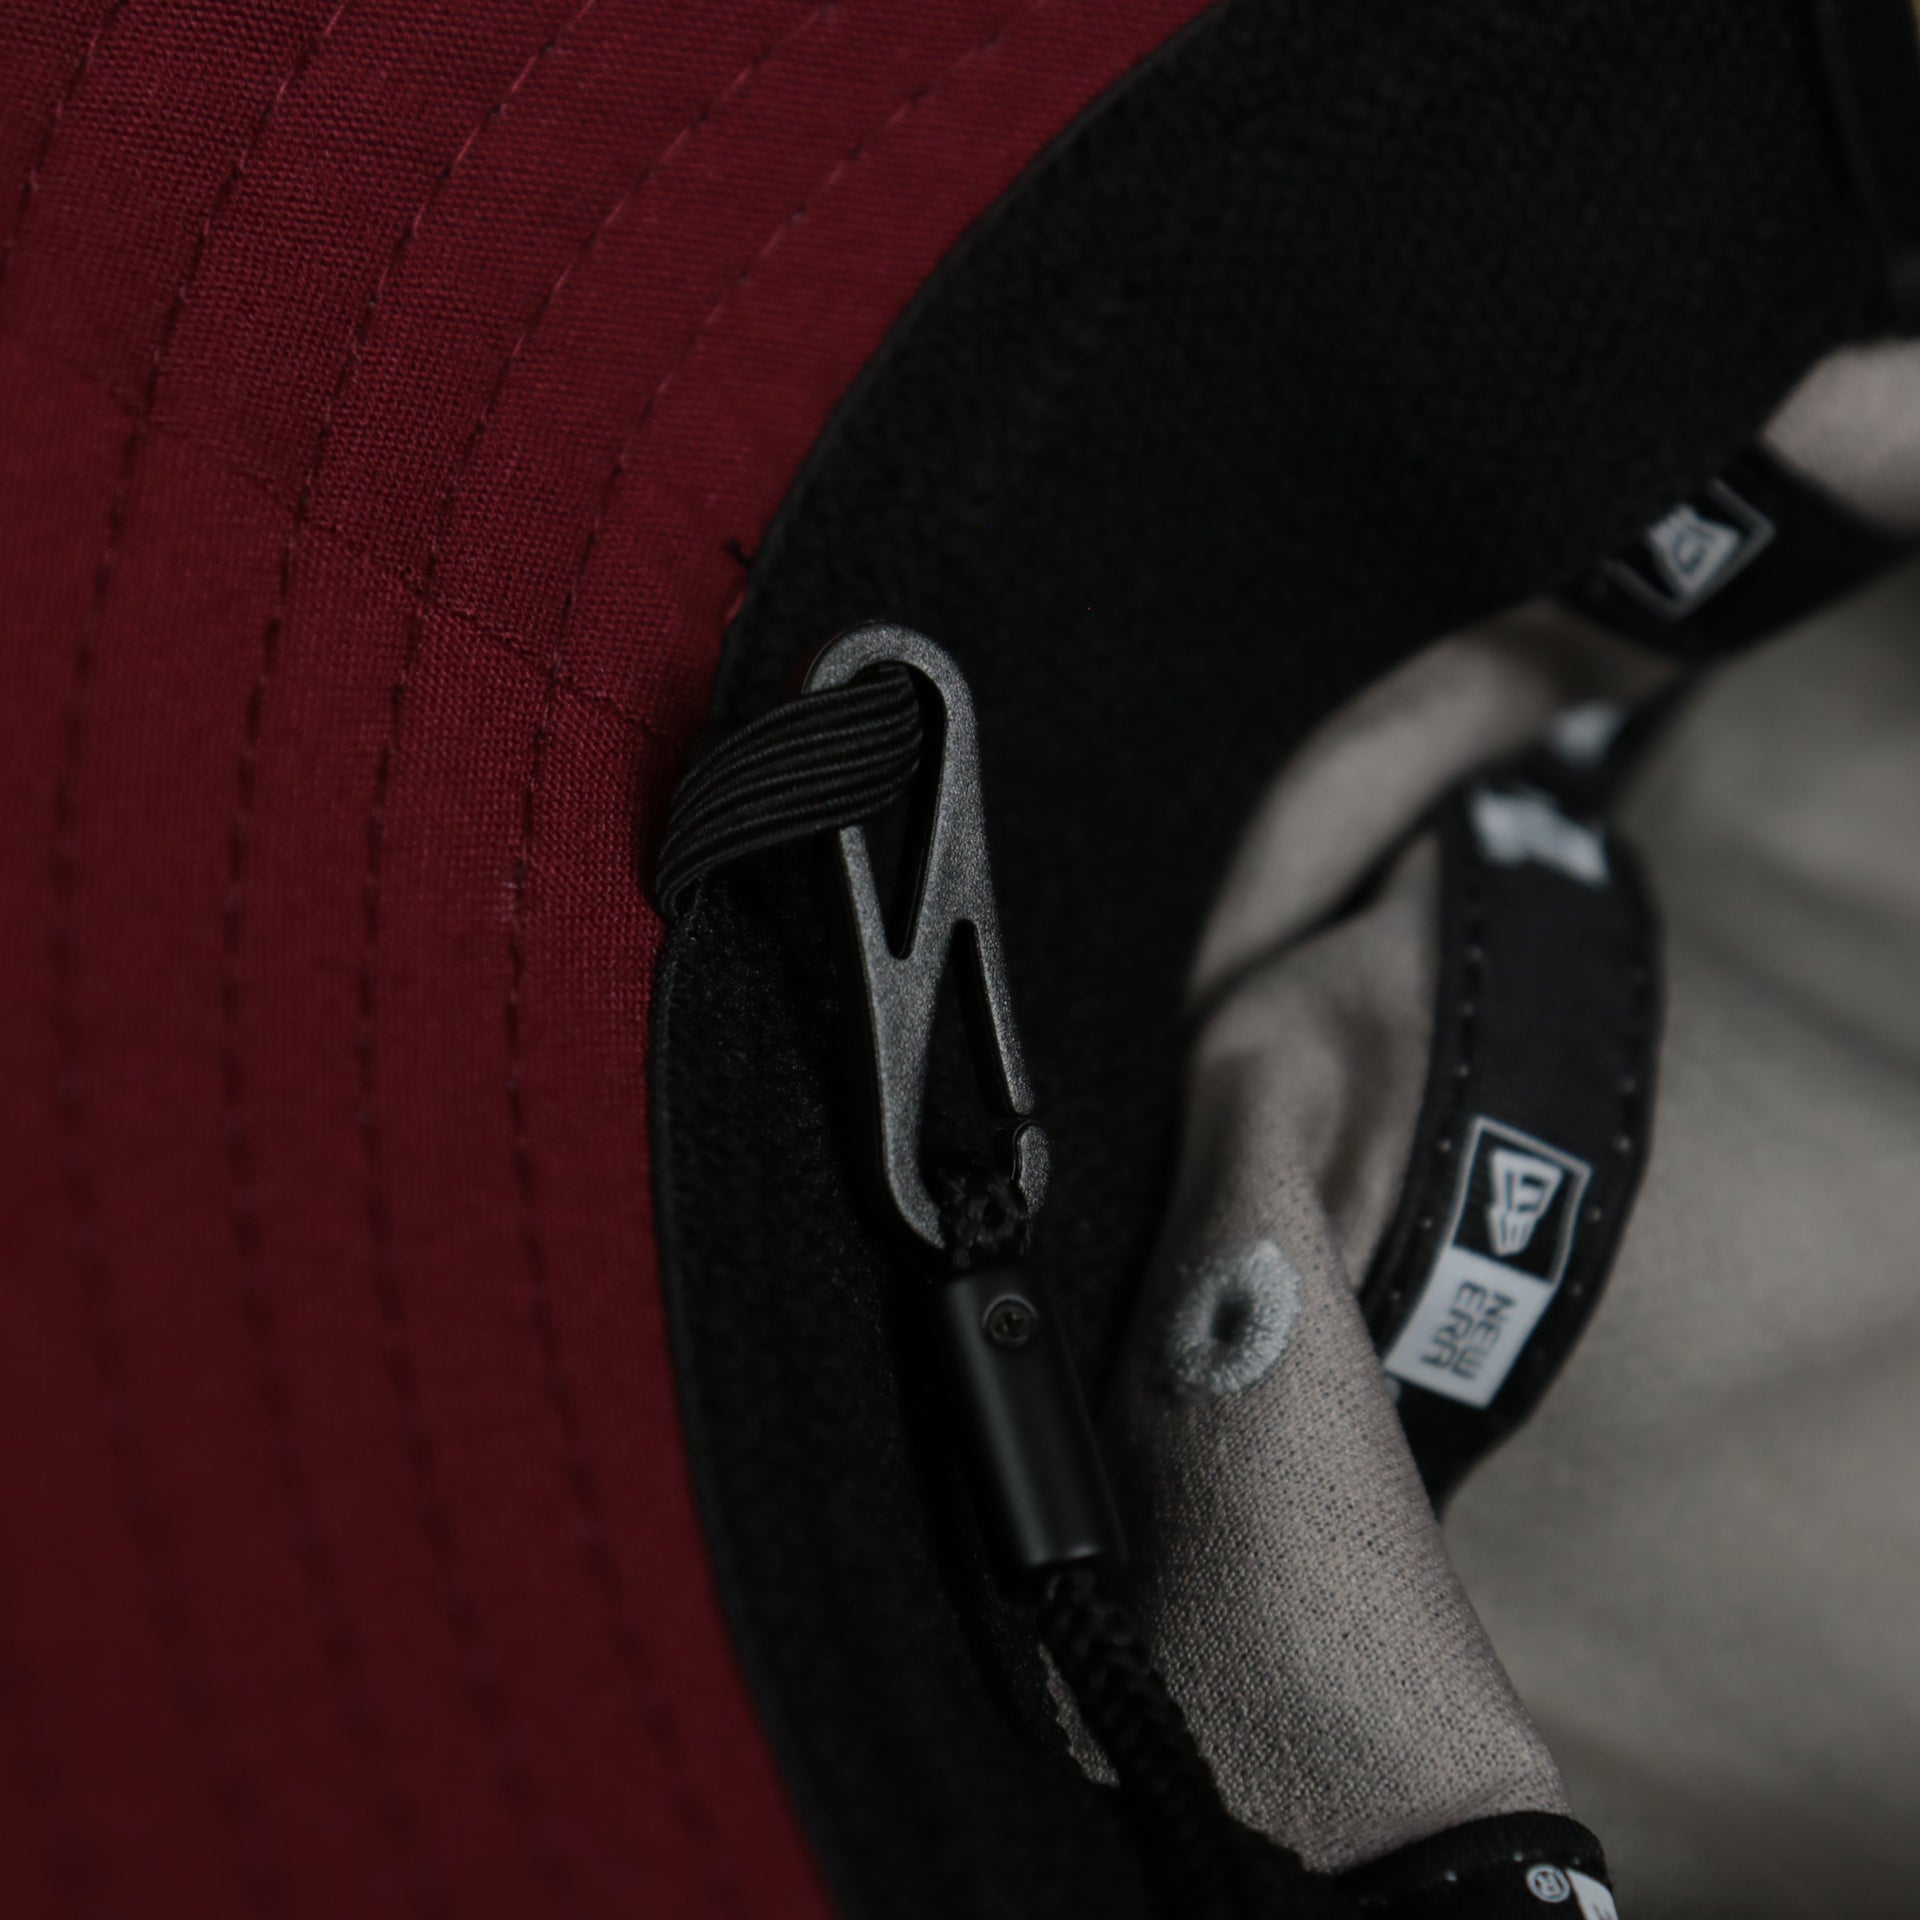 A close up of the removeable chin strap on the Philadelphia Phillies Cooperstown New Era Bucket Hat